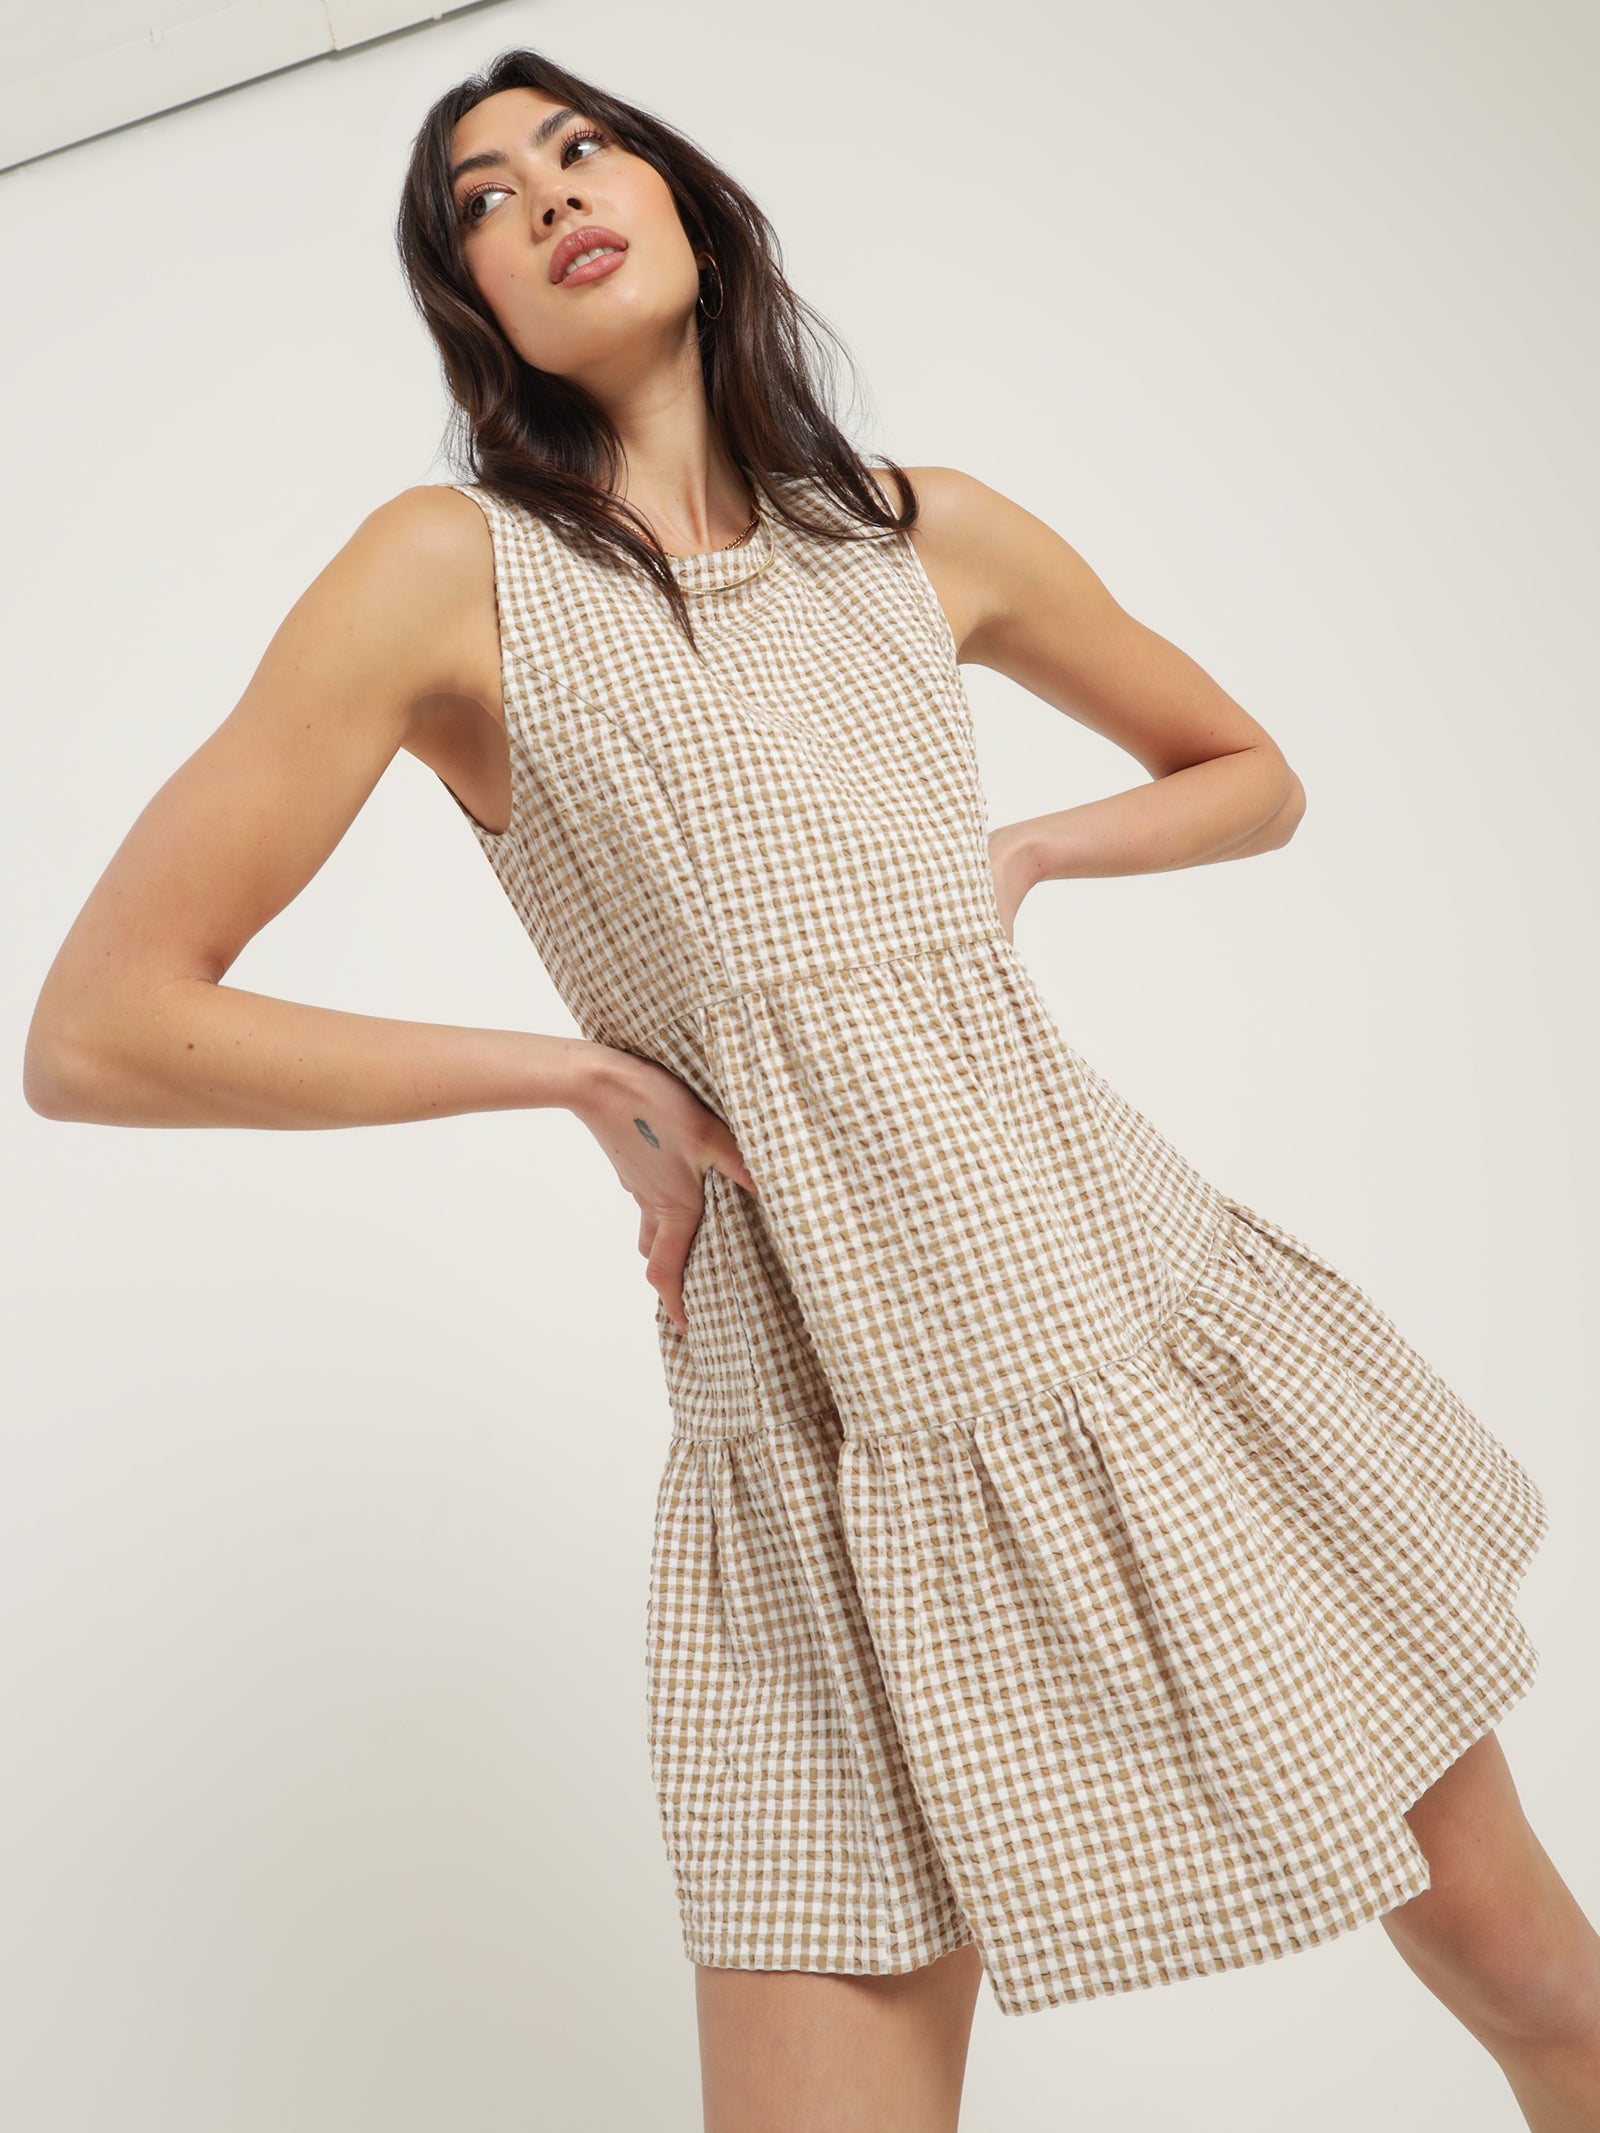 Sutton Tired Dress in Gingham